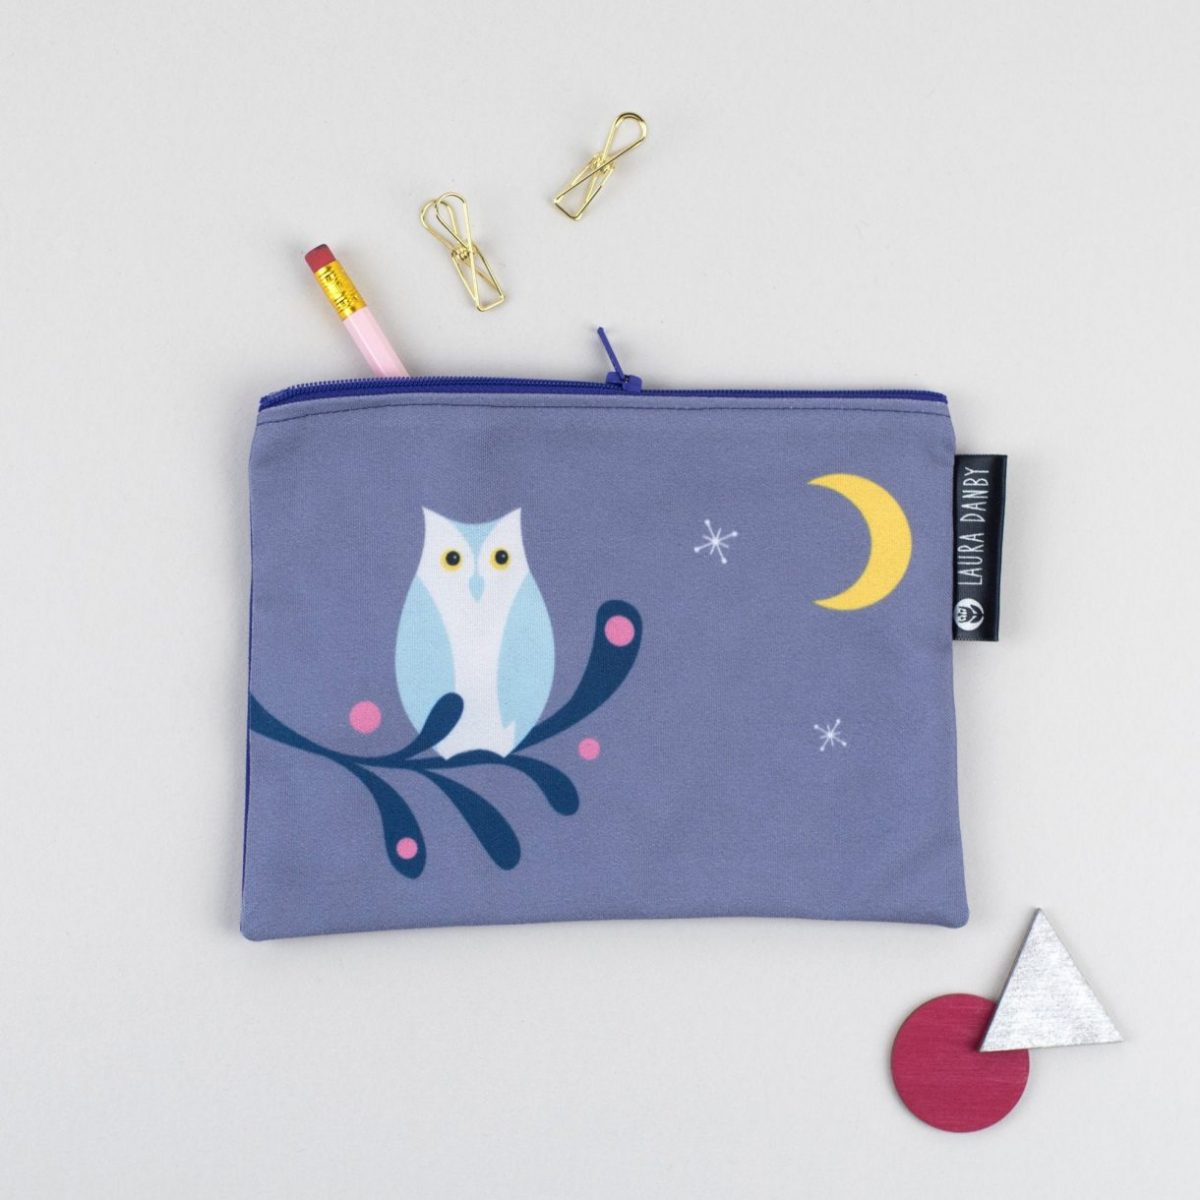 Owl Canvas Pencil Case, Animal Purse, Owl Gift, Printed Owl Makeup Bag, Small Toiletry Bag, Coin Pouch, Illustrated Design, Bird Lover Gift